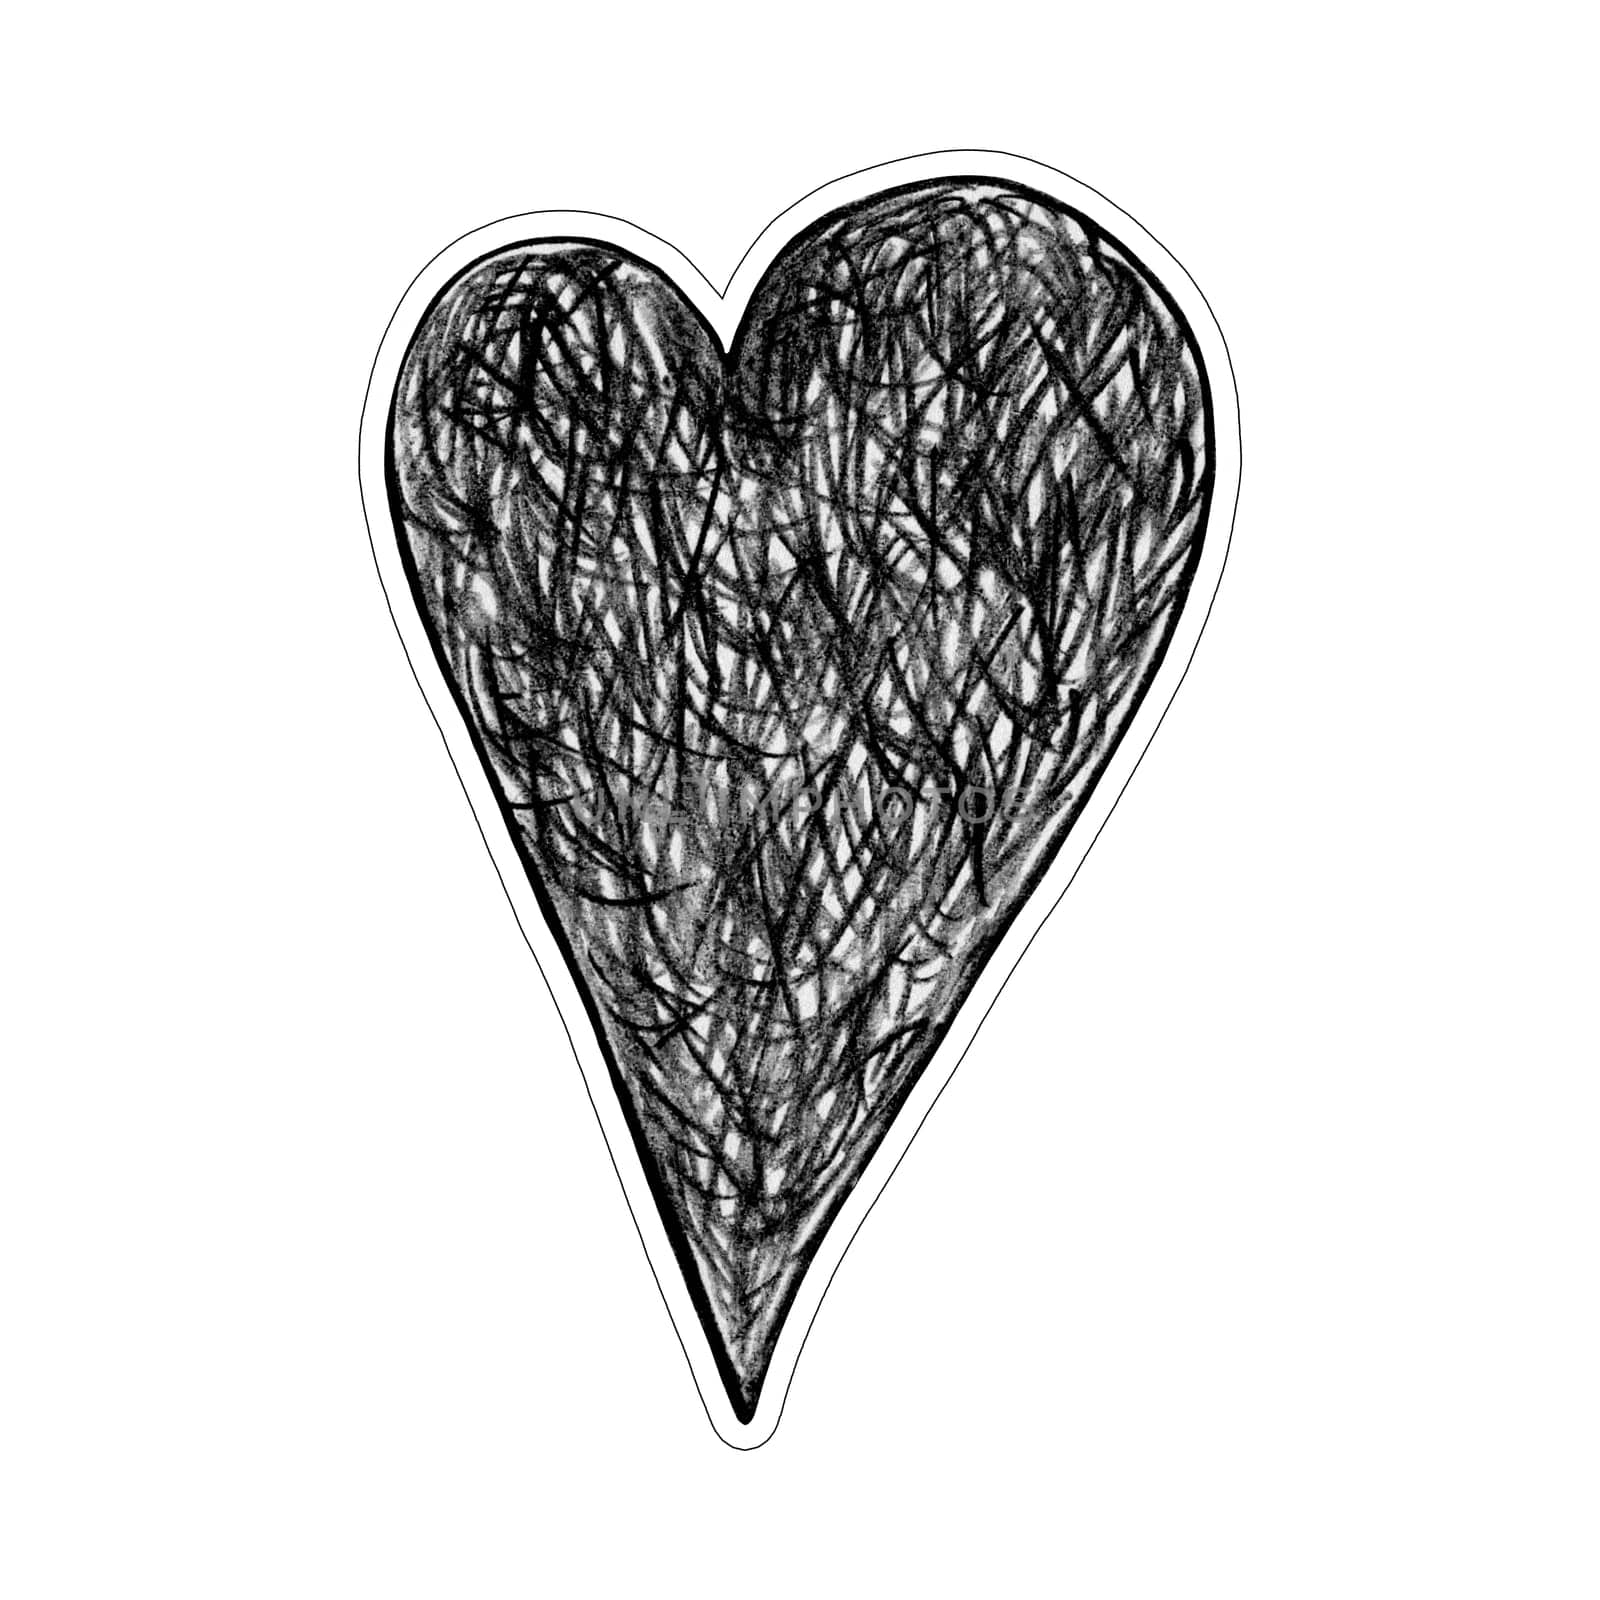 Black Heart Sticker Drawn by Colored Pencil. The Sign of World Heart Day. Symbol of Valentines Day. Heart Shape Isolated on White Background.